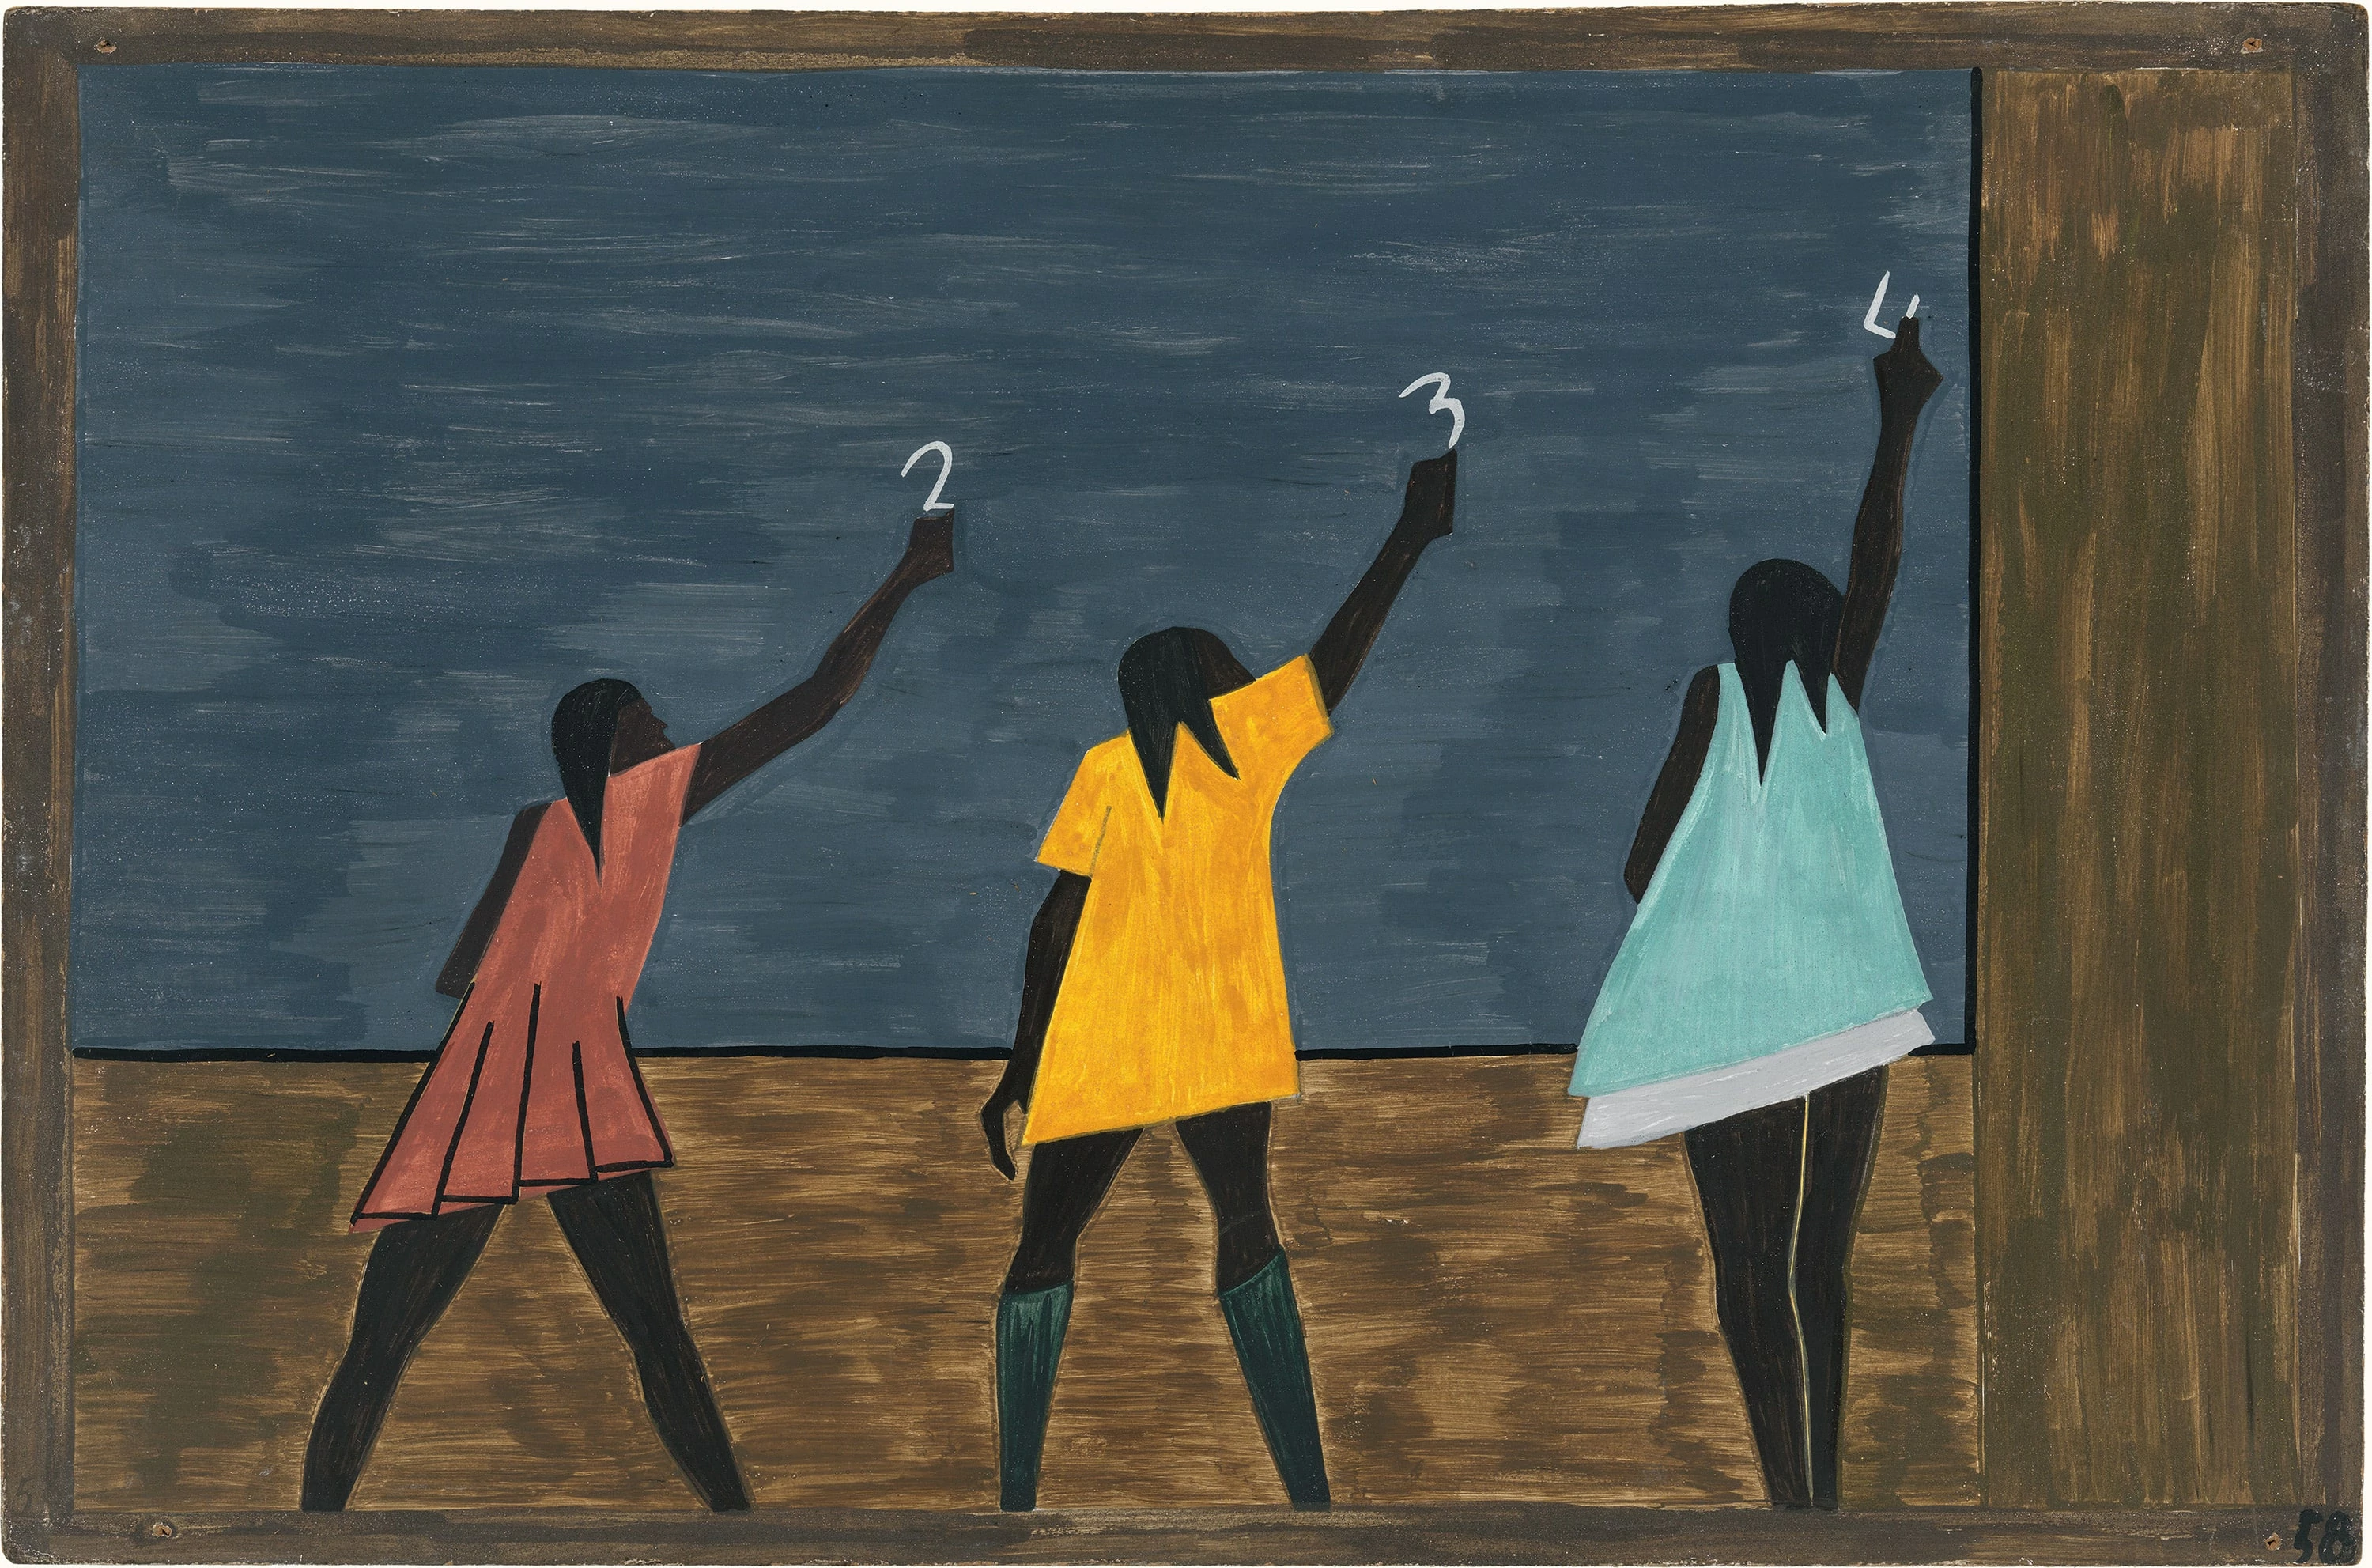 Migration Series No.58: In the North the African American had more educational opportunities, Jacob Lawrence